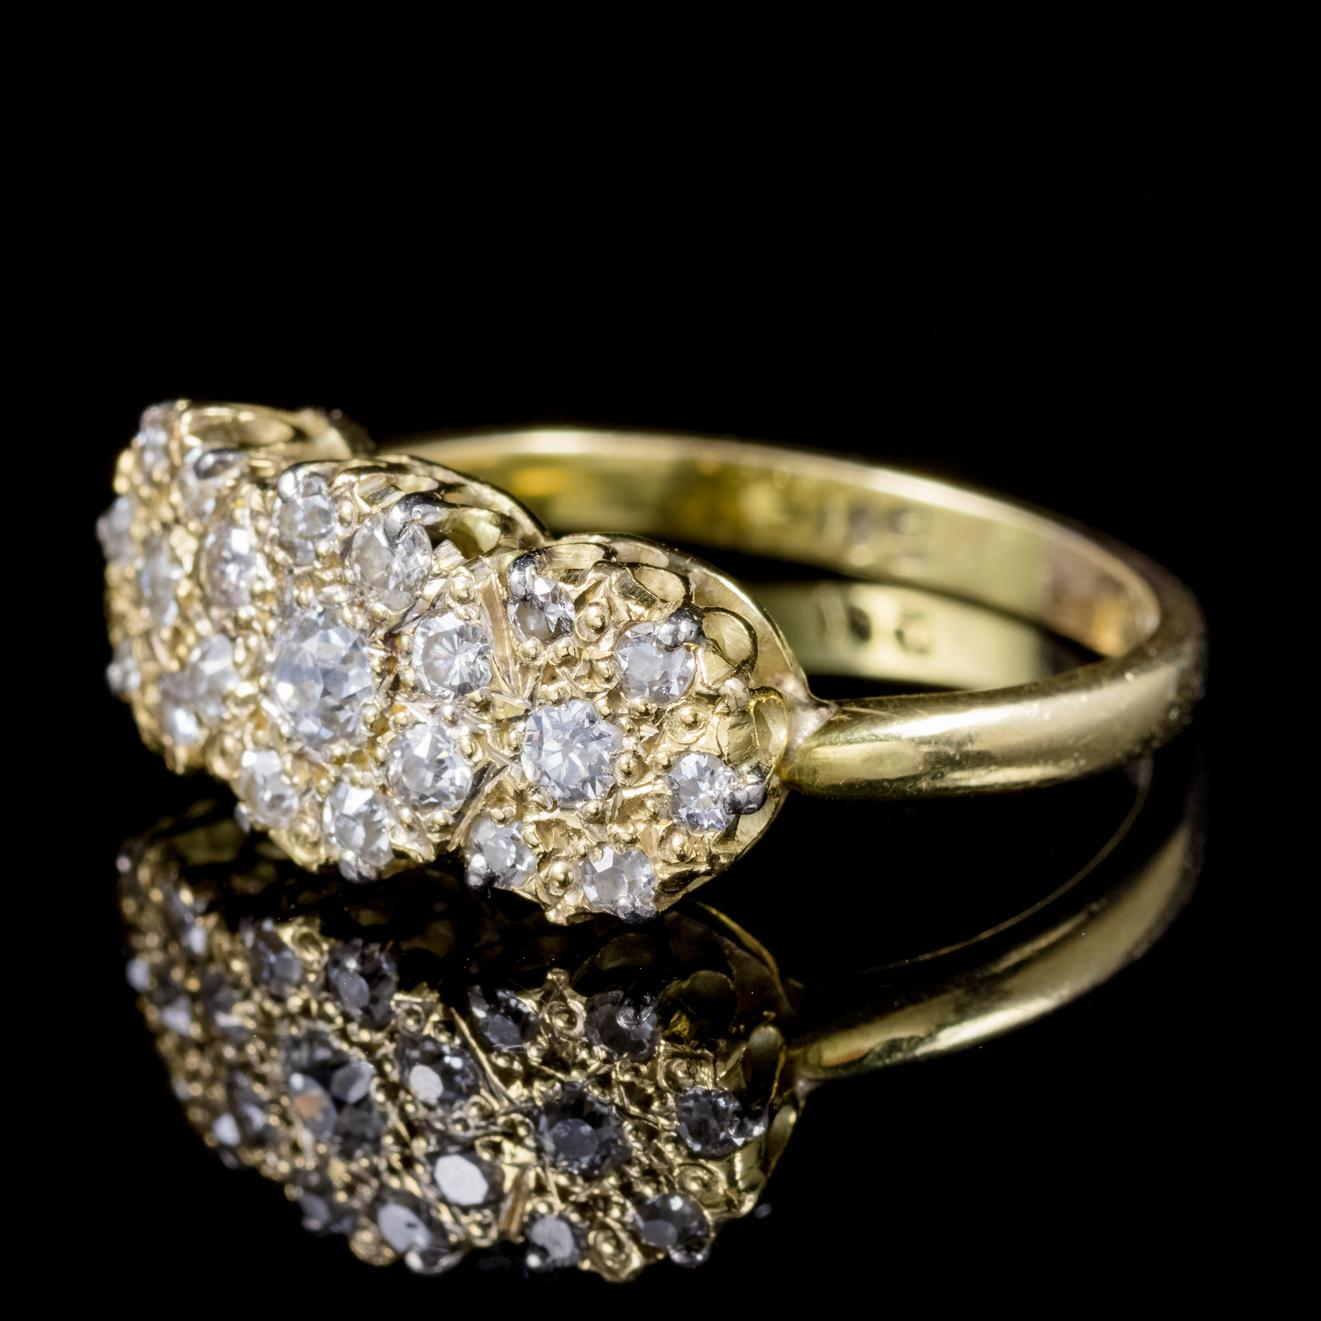 A stunning antique Victorian cluster ring C. 1900, adorned with approx. 1ct of Diamond, the largest of which is 0.10ct.

The stones are beautiful VS1/ SI1 clarity – H colour Diamonds and sparkle beautifully across the trilogy gallery. 

Diamonds